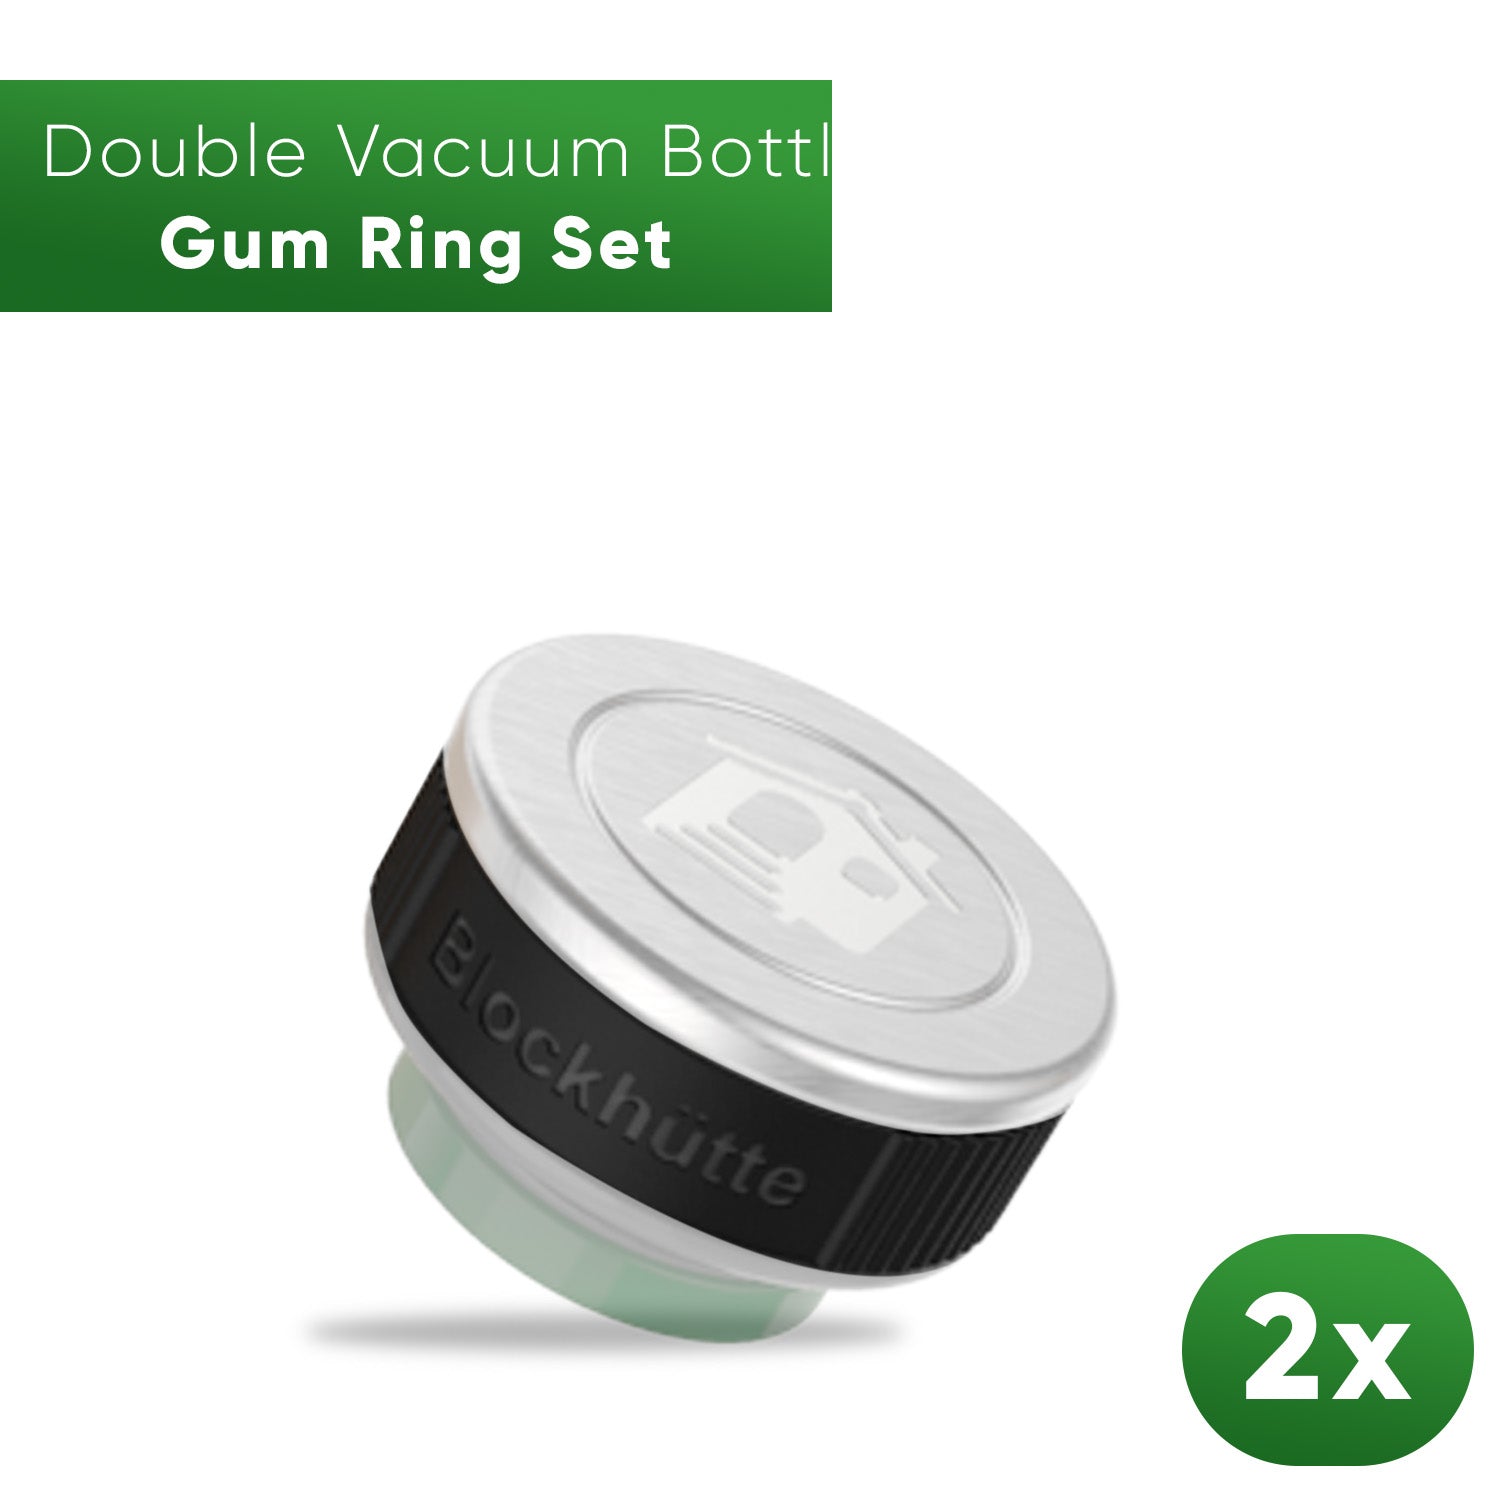 Double Vacuum Insulated Water Bottle - Gum Ring